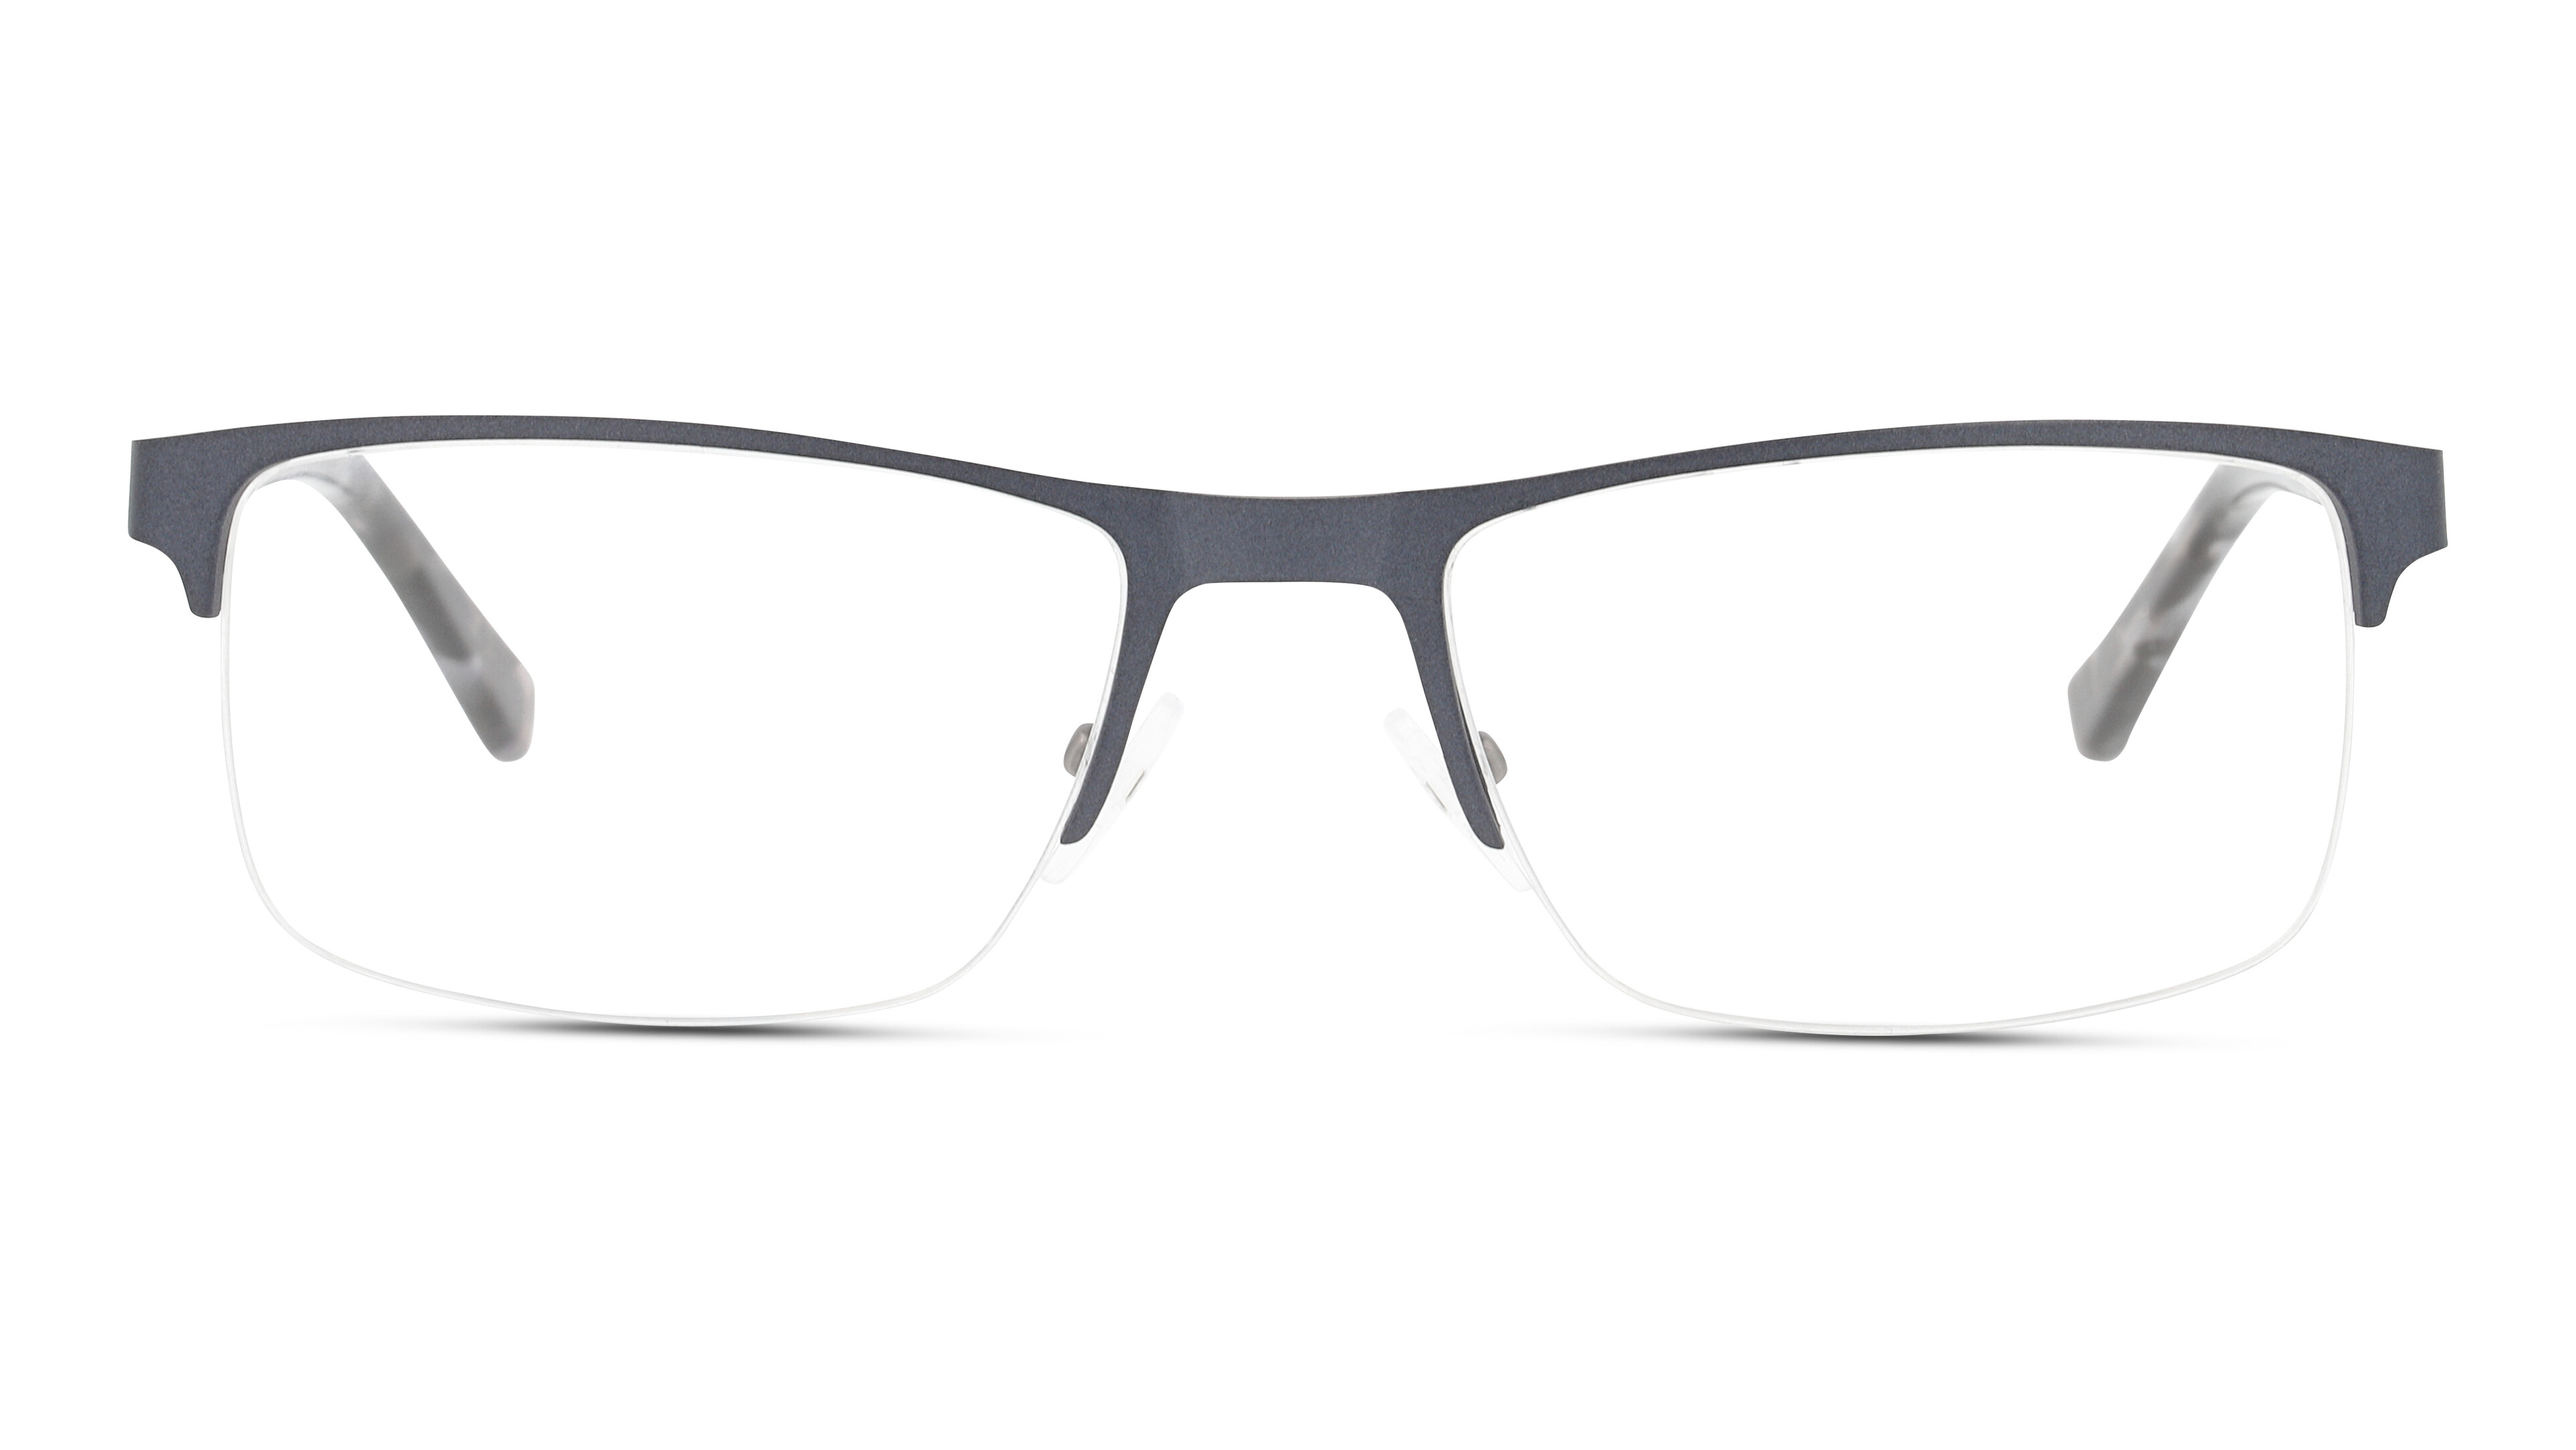 [products.image.front] UNOFFICIAL UNOM0183 GH00 Brille